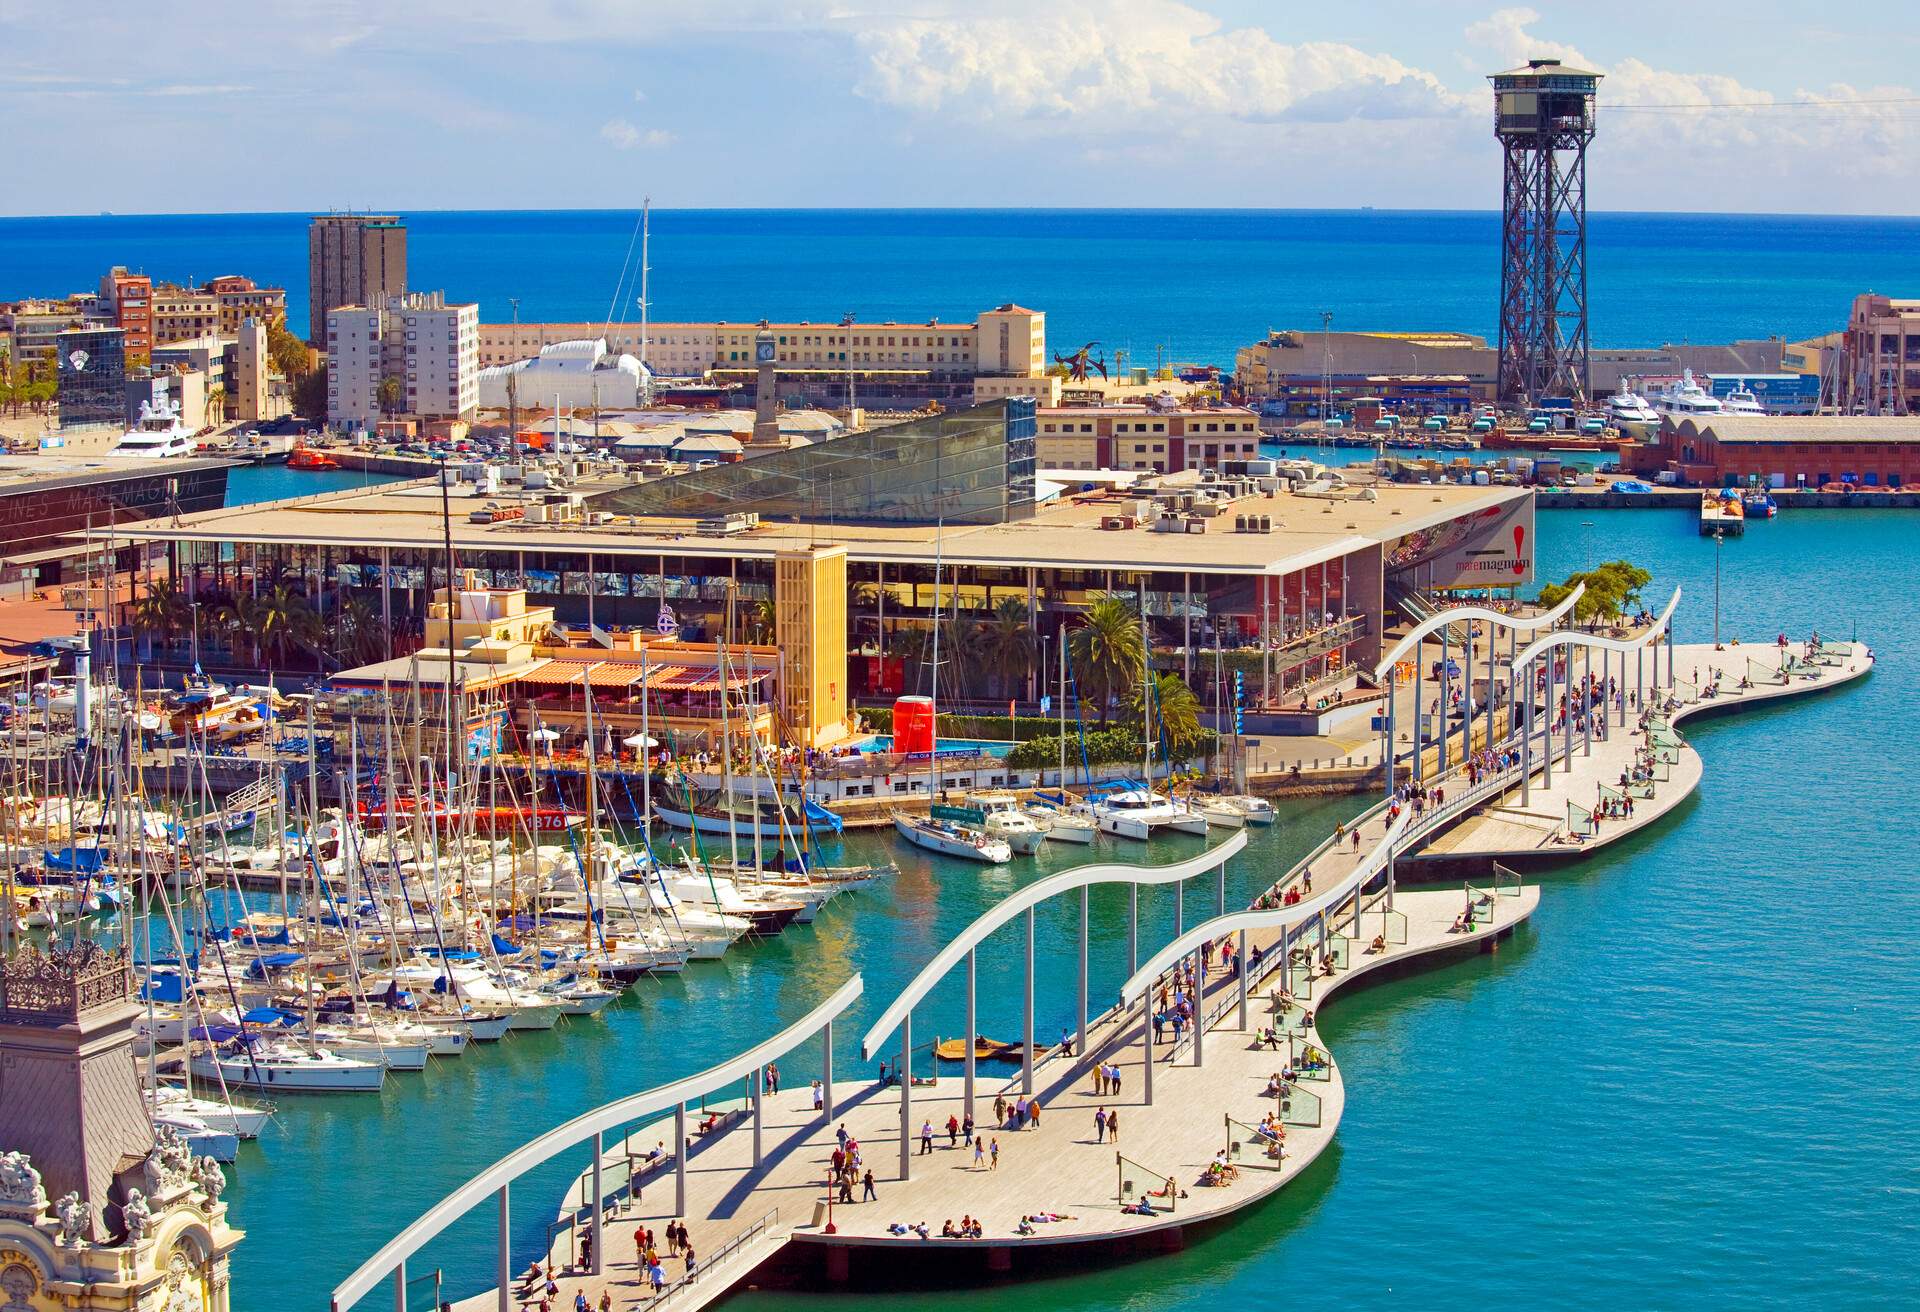 Barcelona, Catalonia, Spain. Port Vell contains the Maremàgnum (a mall containing shops, a multiplex cinema, bars and restaurants), IMAX Port Vell and Europe's largest aquarium